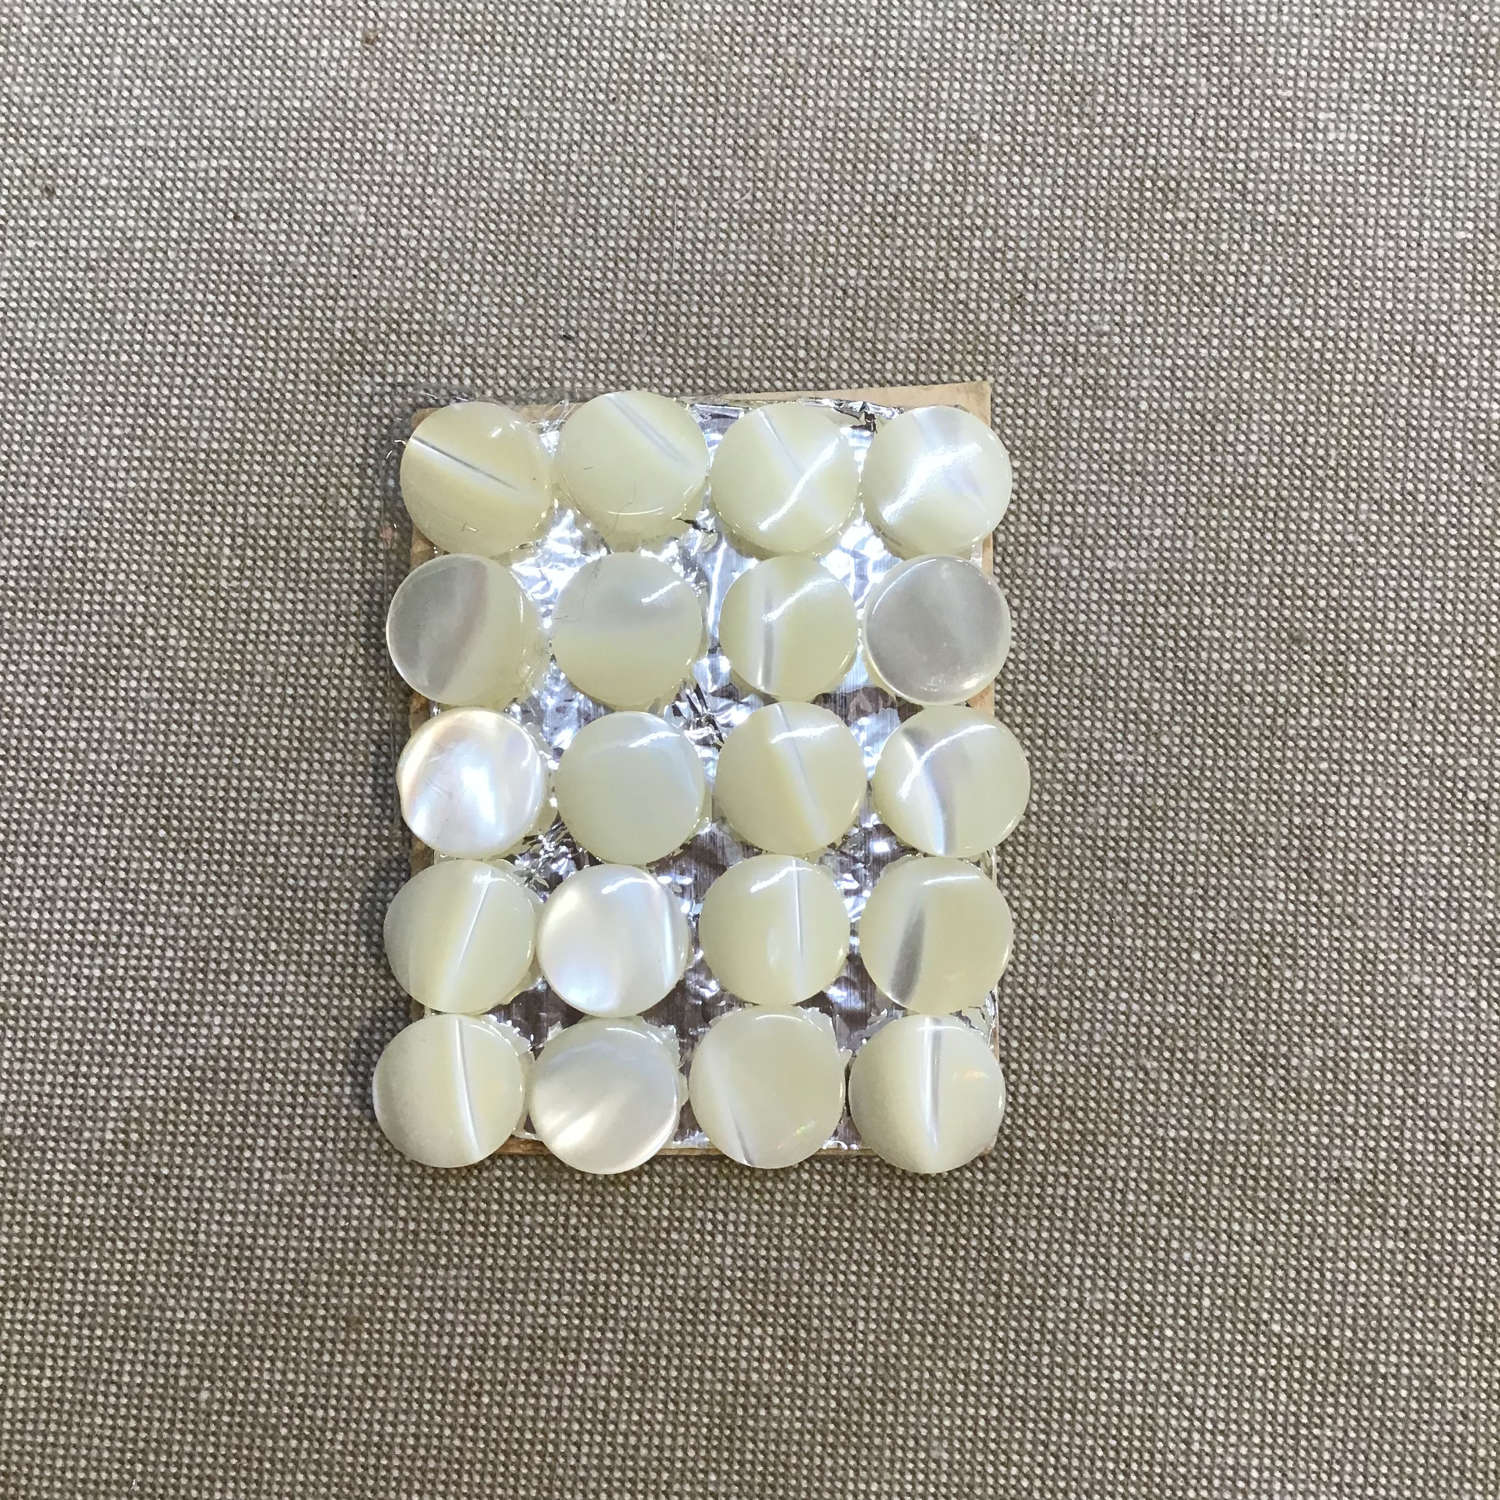 20 mother of pearl button